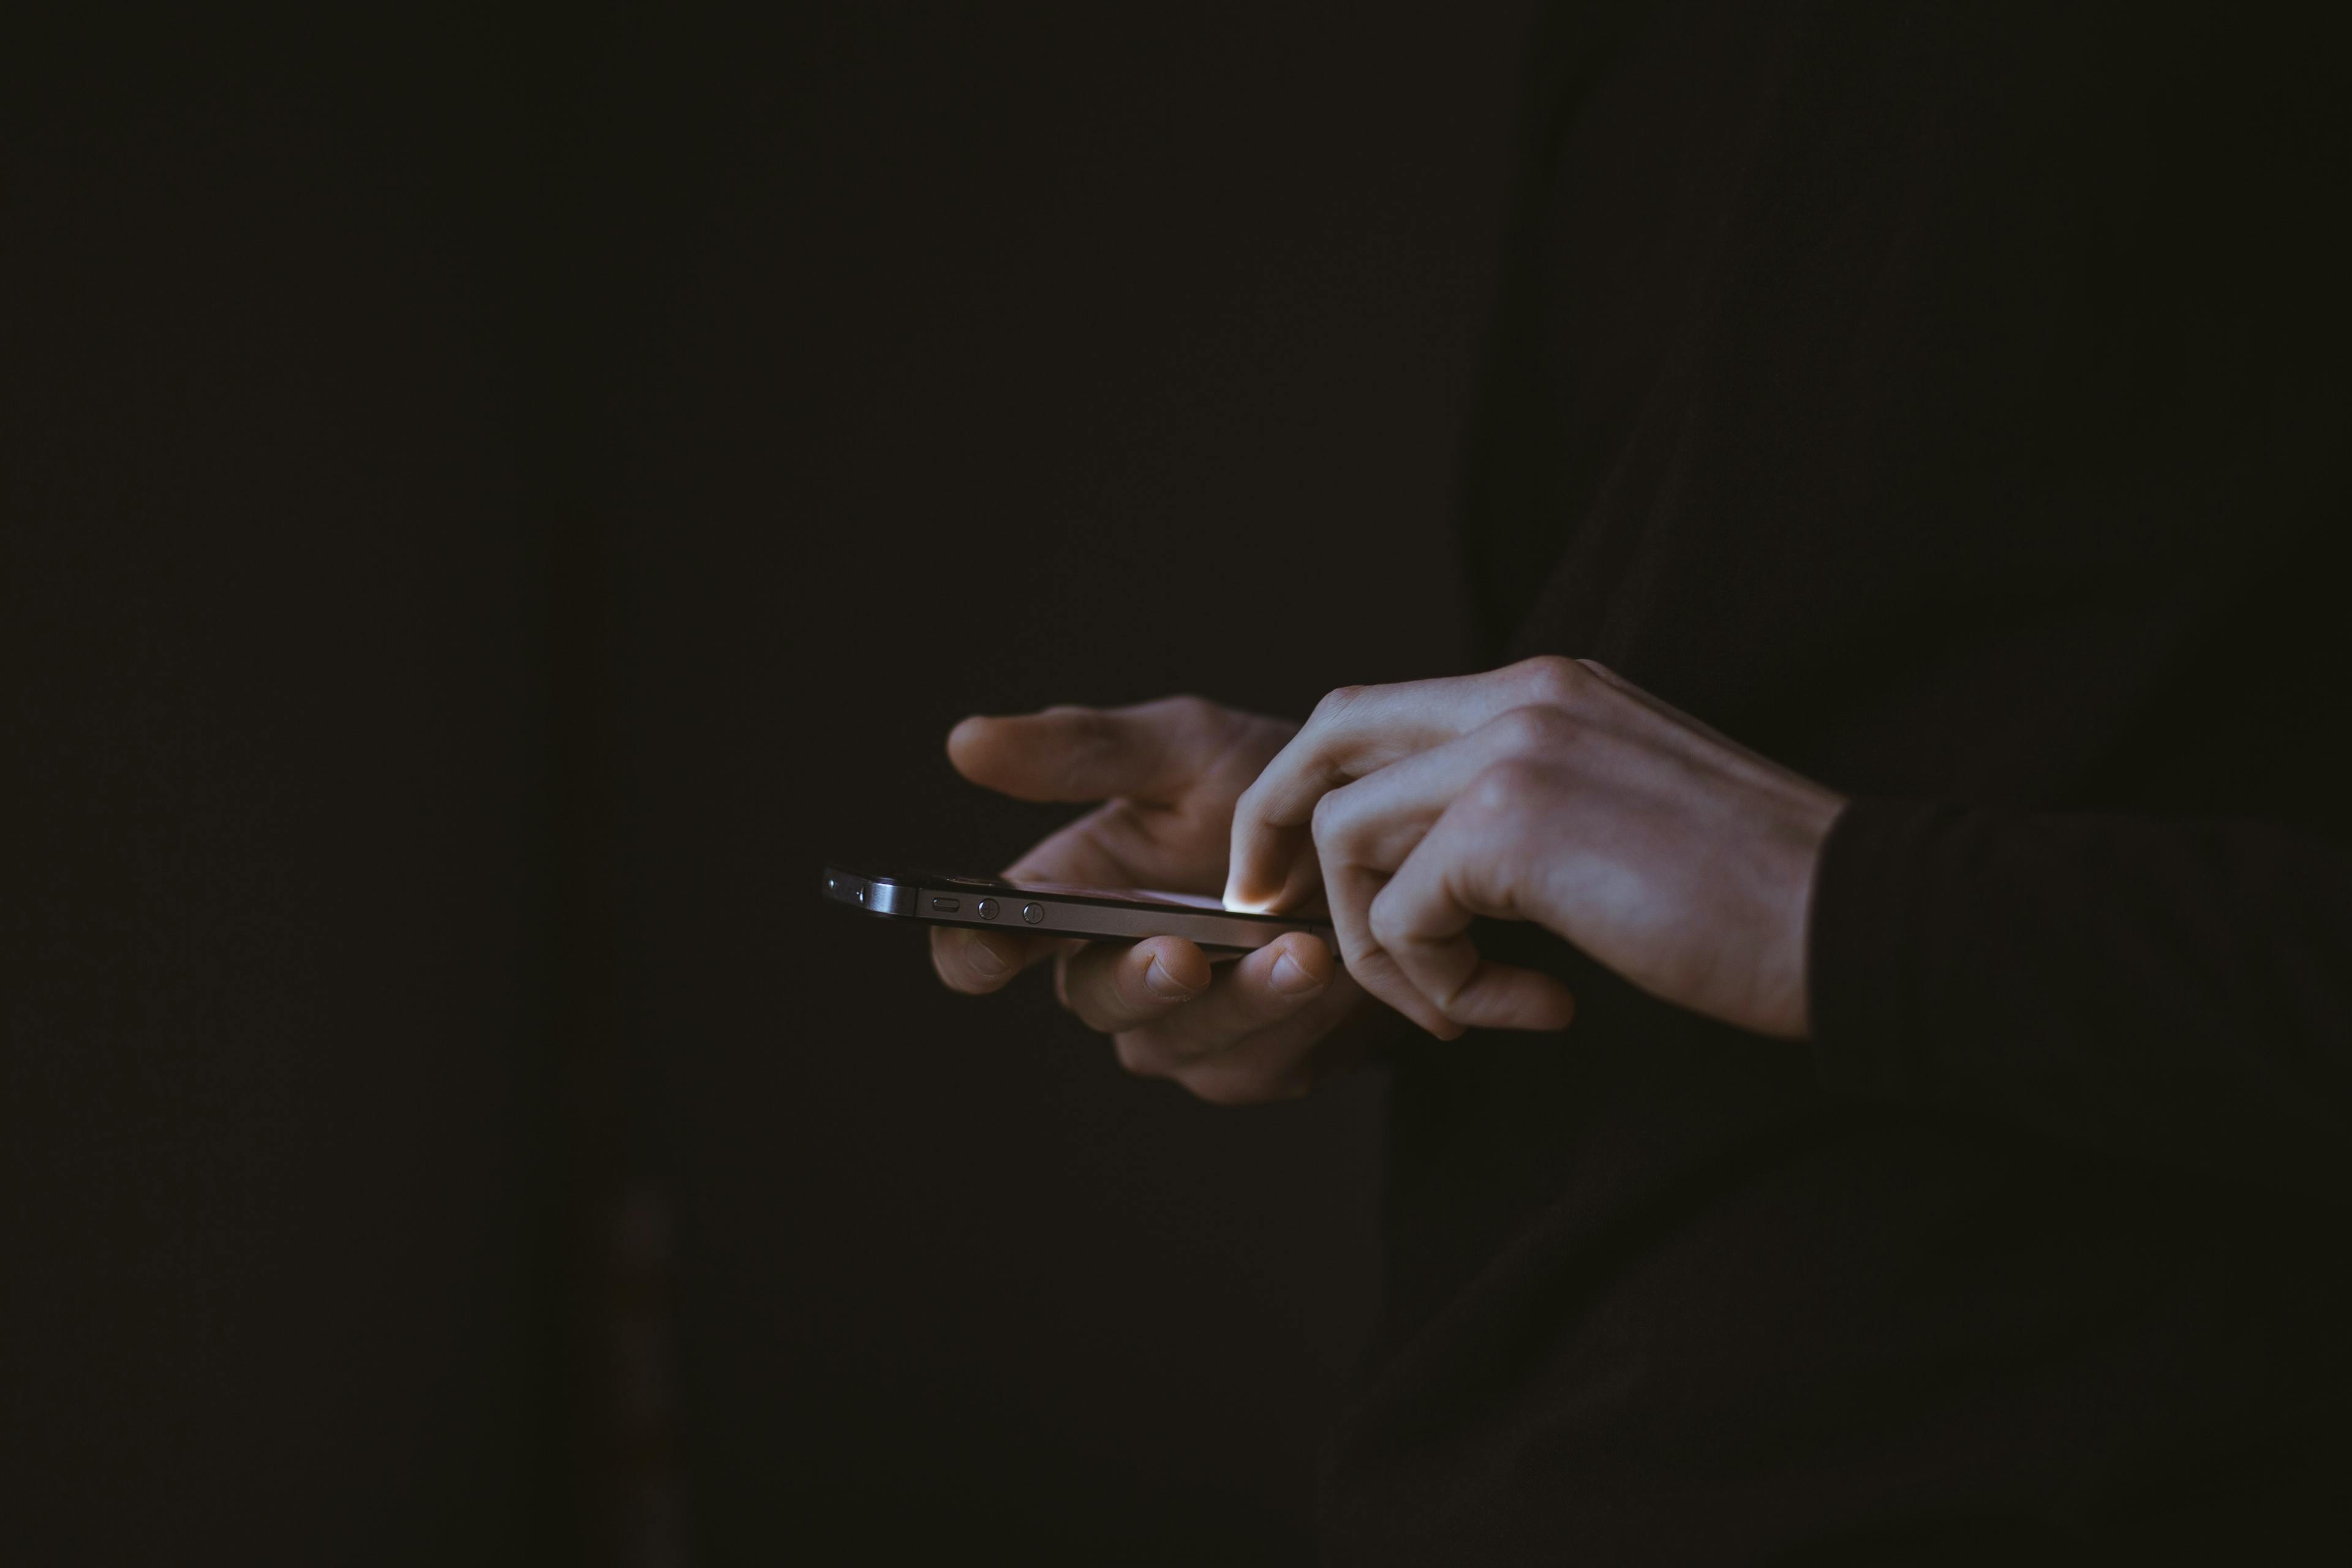 image close up of a person's hands using their phone against a dark background